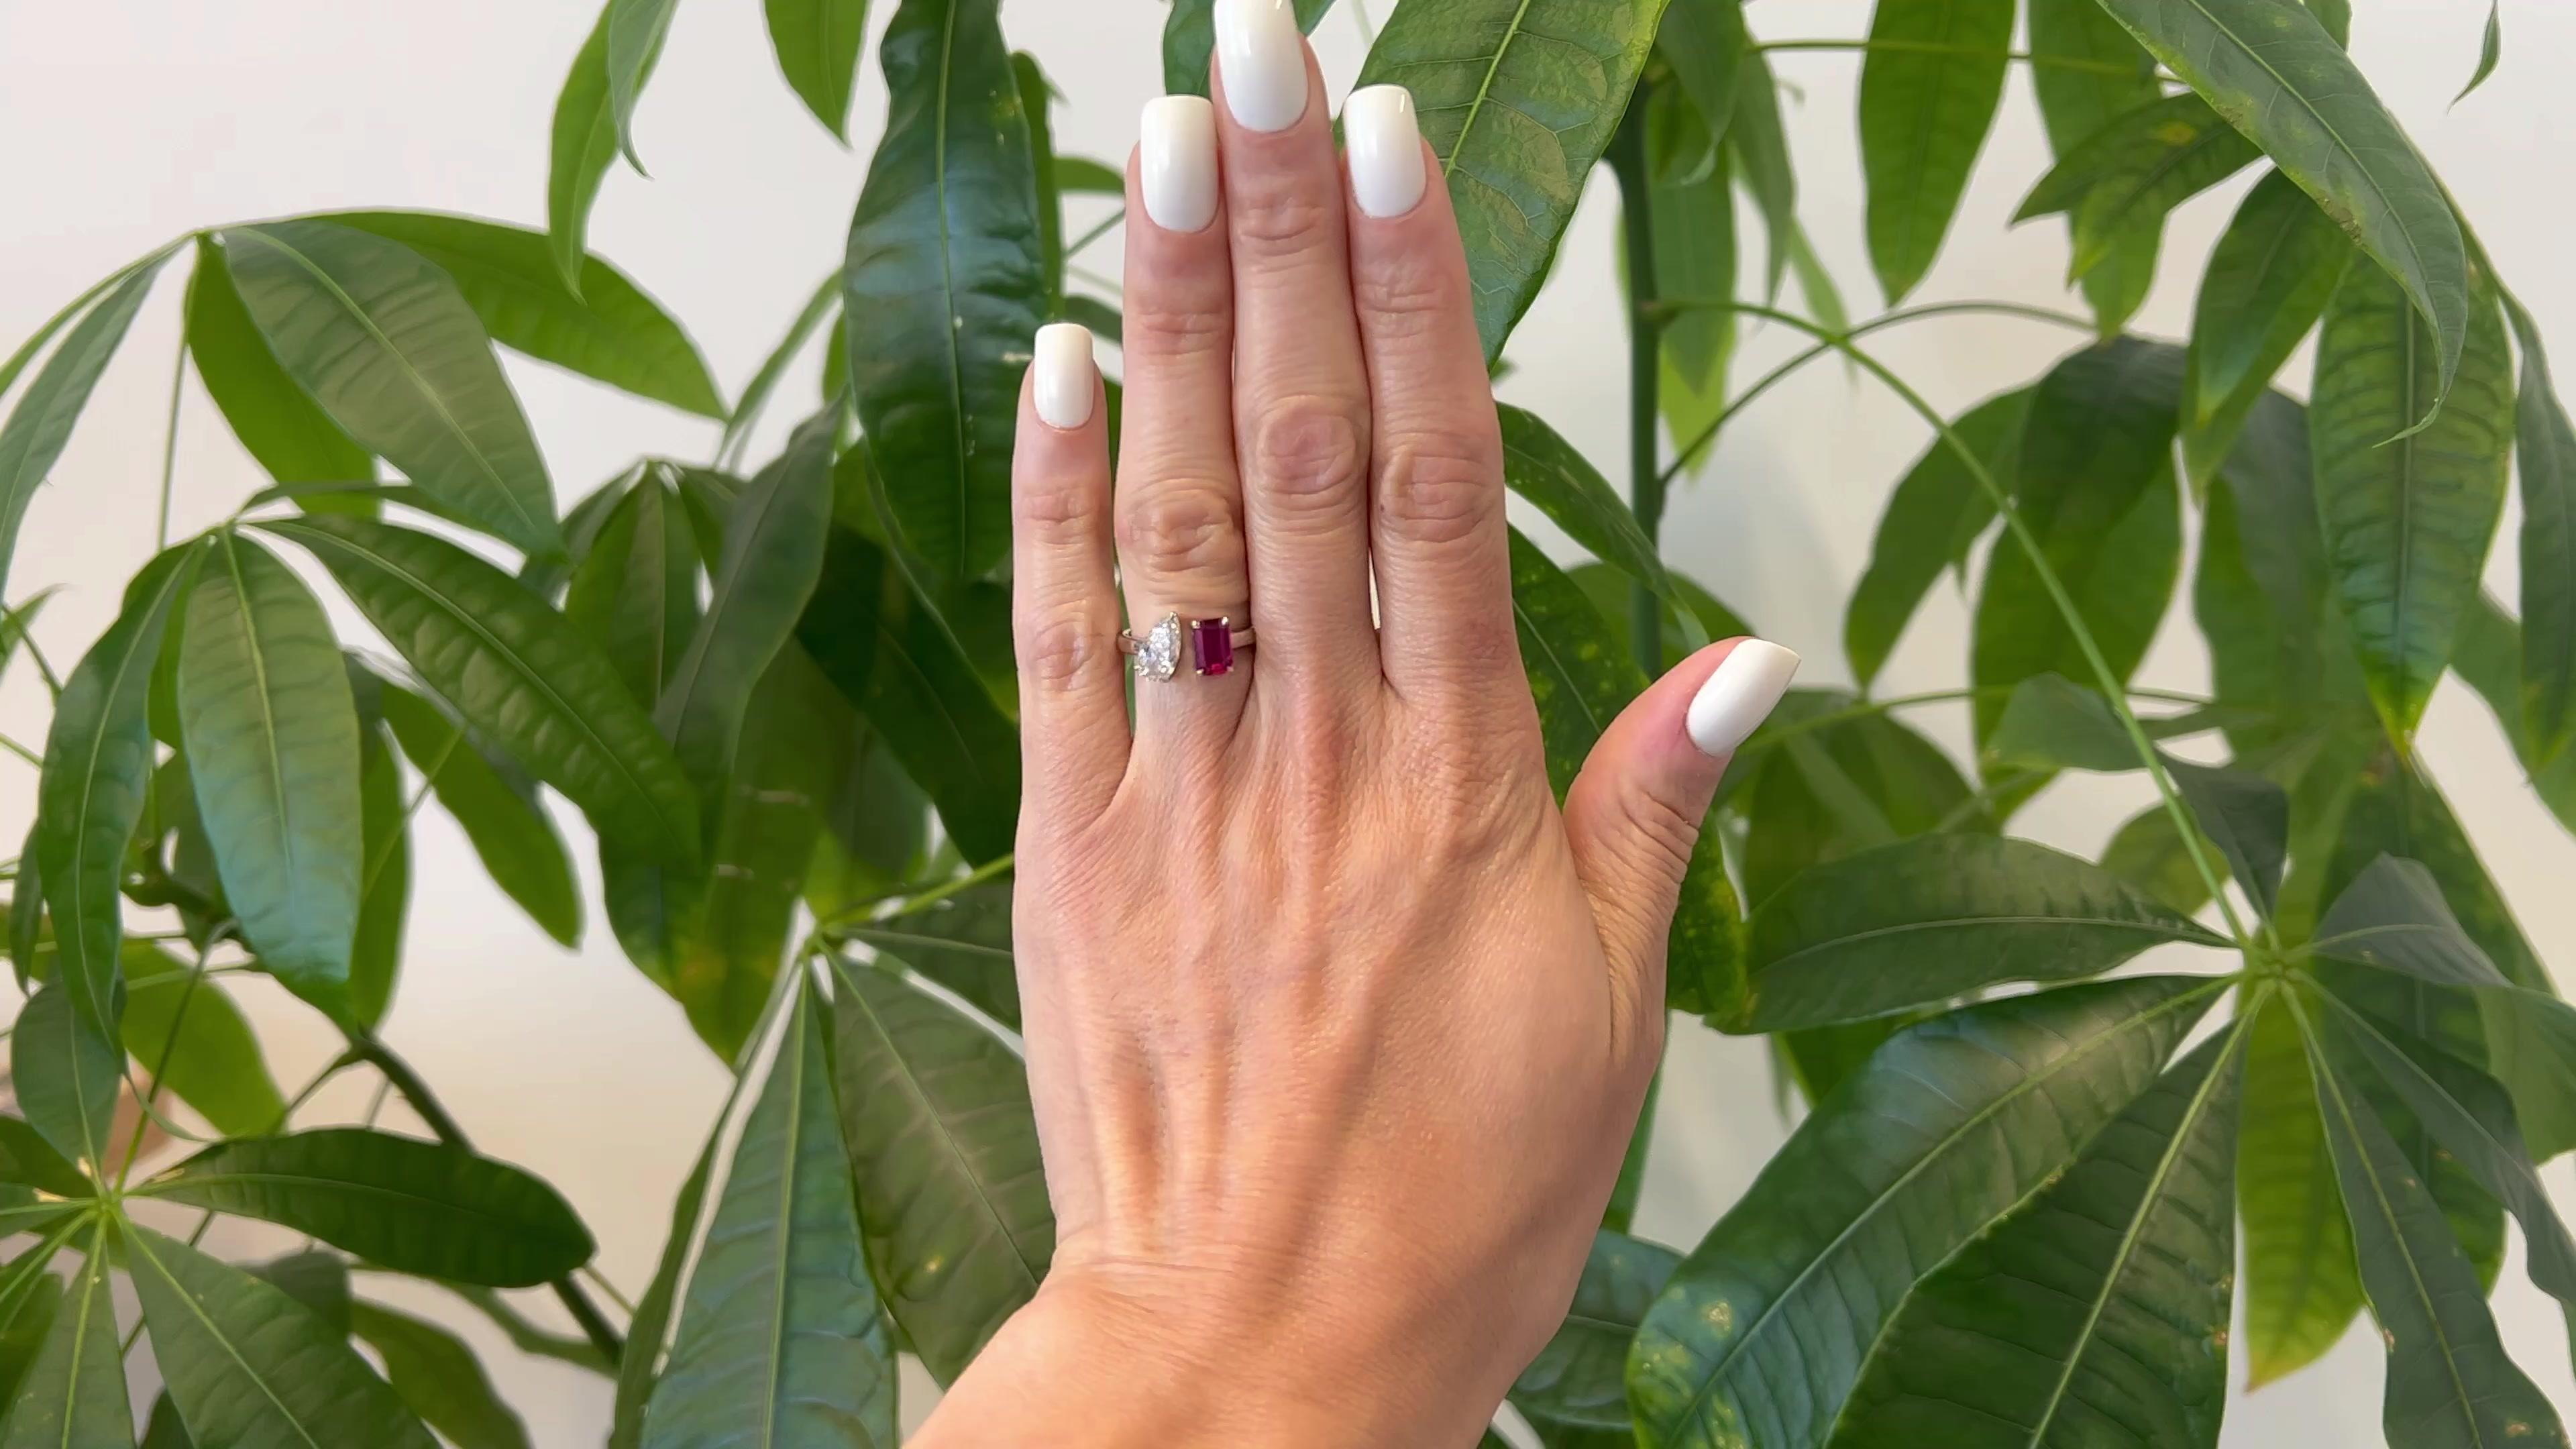 One GIA 1.15 Carat Pear Cut Diamond and Ruby Platinum Toi et Moi Ring. Featuring one GIA pear cut diamond of 1.15 carats, accompanied with GIA #6465333736 stating the diamond is F color, I2 clarity. Accented by one octagonal step cut ruby of 1.47